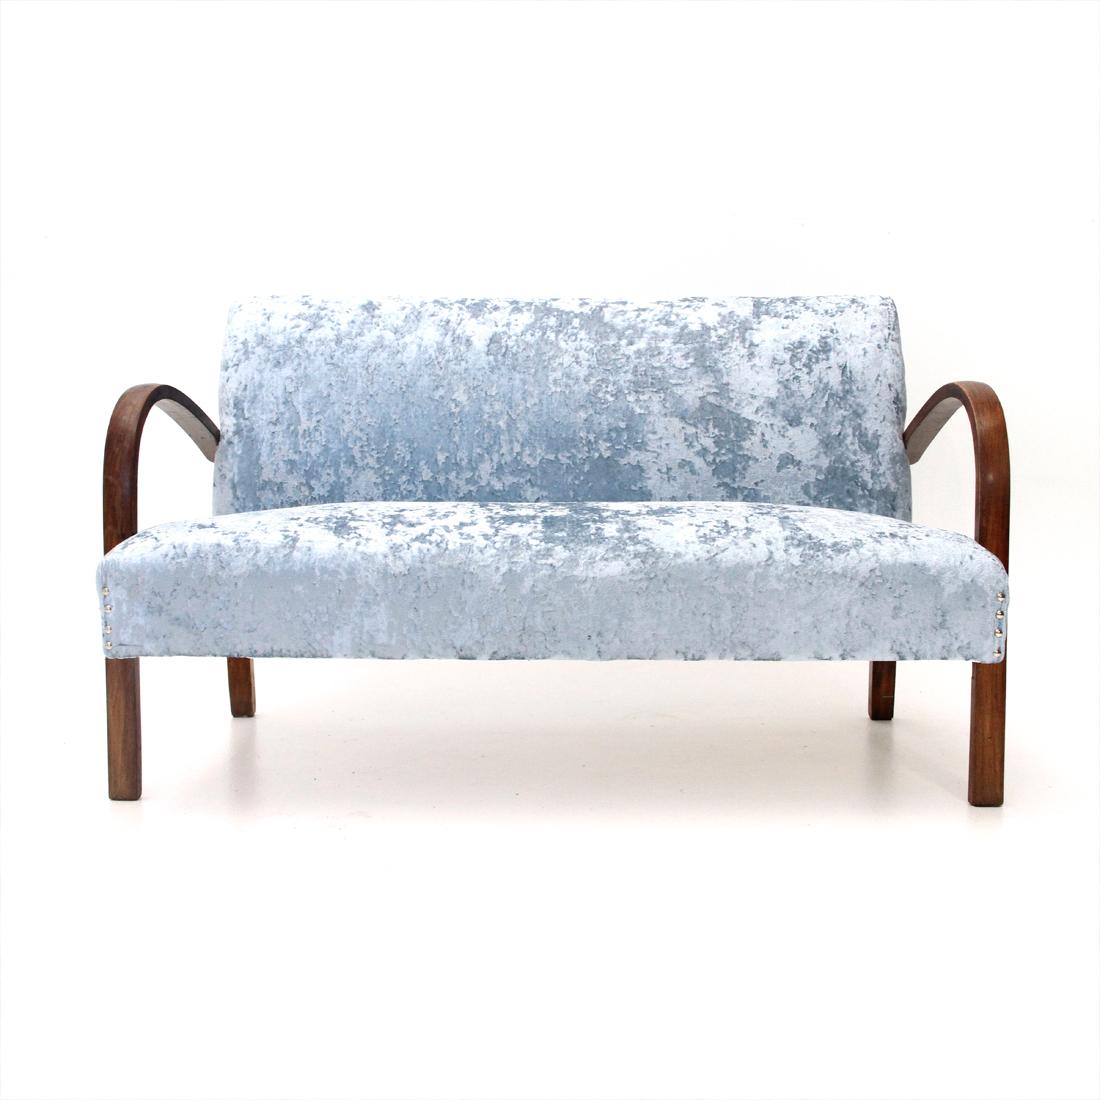 Italian manufacturing sofa produced in the 1940s.
Wooden structure padded and lined with new azure velvet fabric.
Armrests in curved wood.
Good general conditions, some signs due to normal use over time.

Dimensions: Width 127 cm, depth 80 cm,